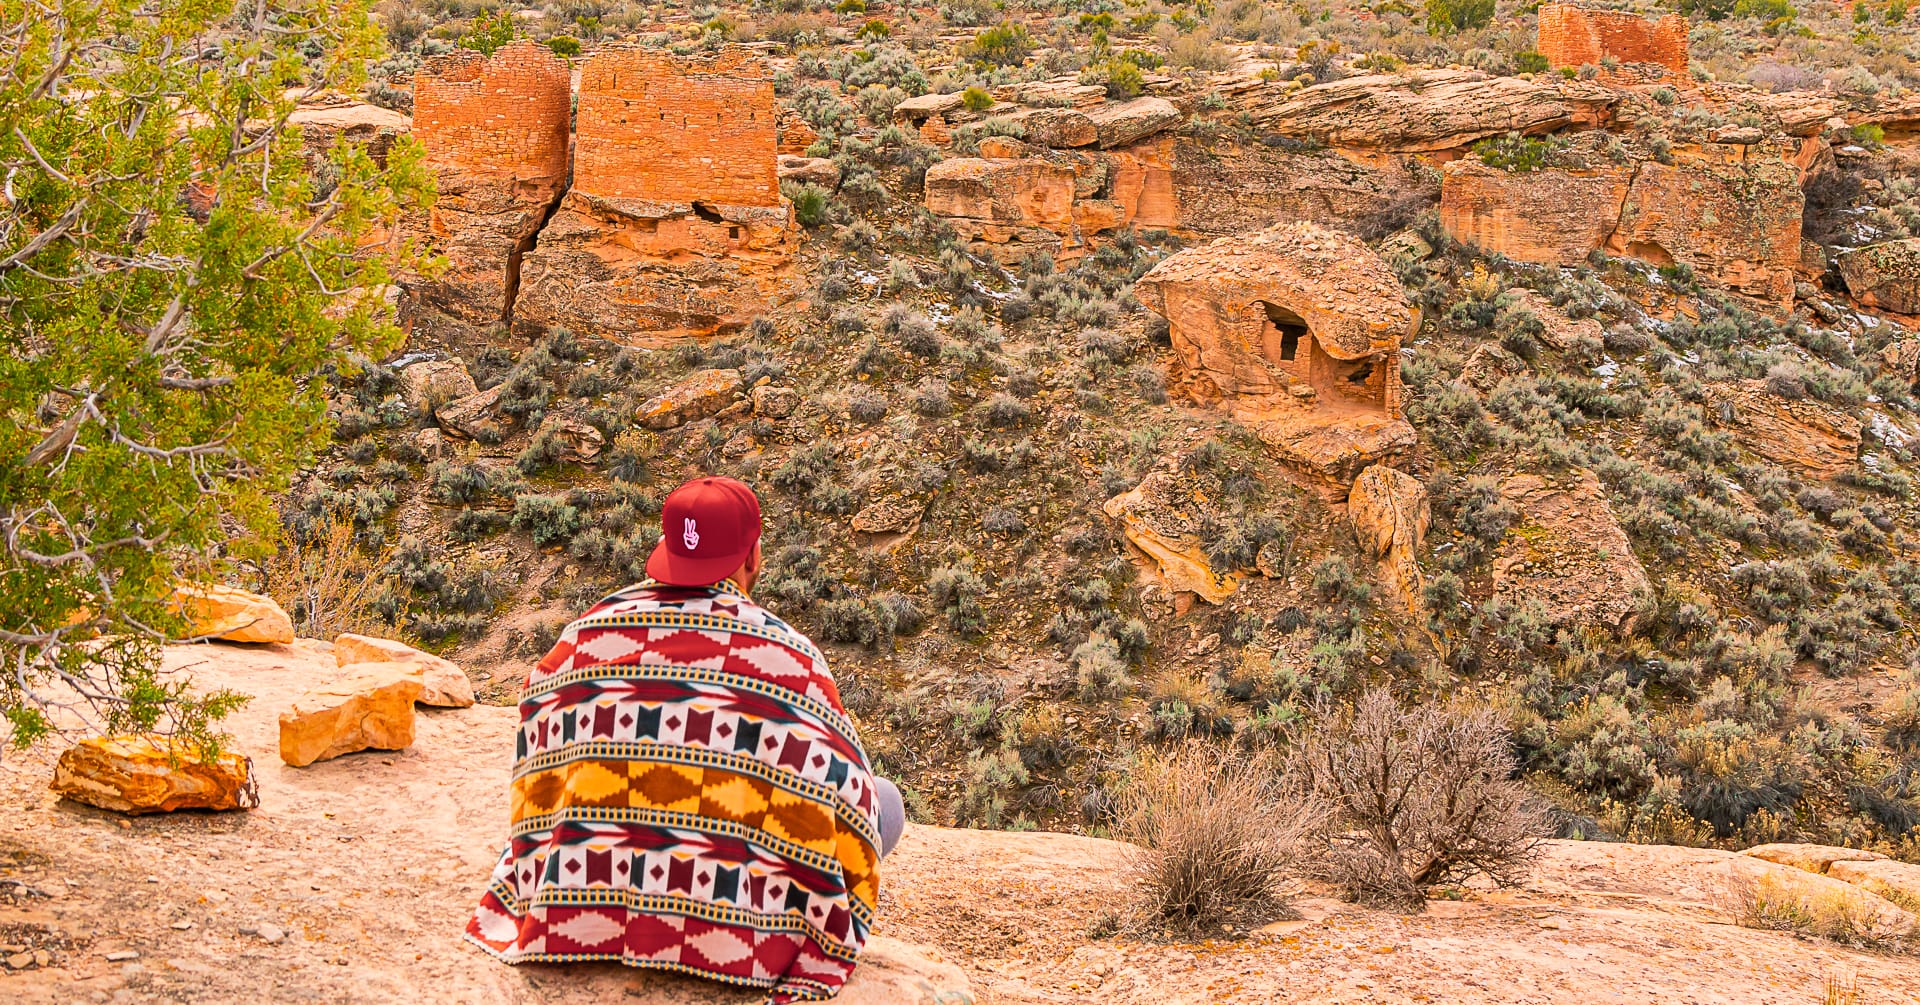 A man sits on a cliff wearing a red hat and wrapped in a colorful native-inspired blanket looking at ancient rock dwellings at Hovenweep National Monument in Blanding, Utah